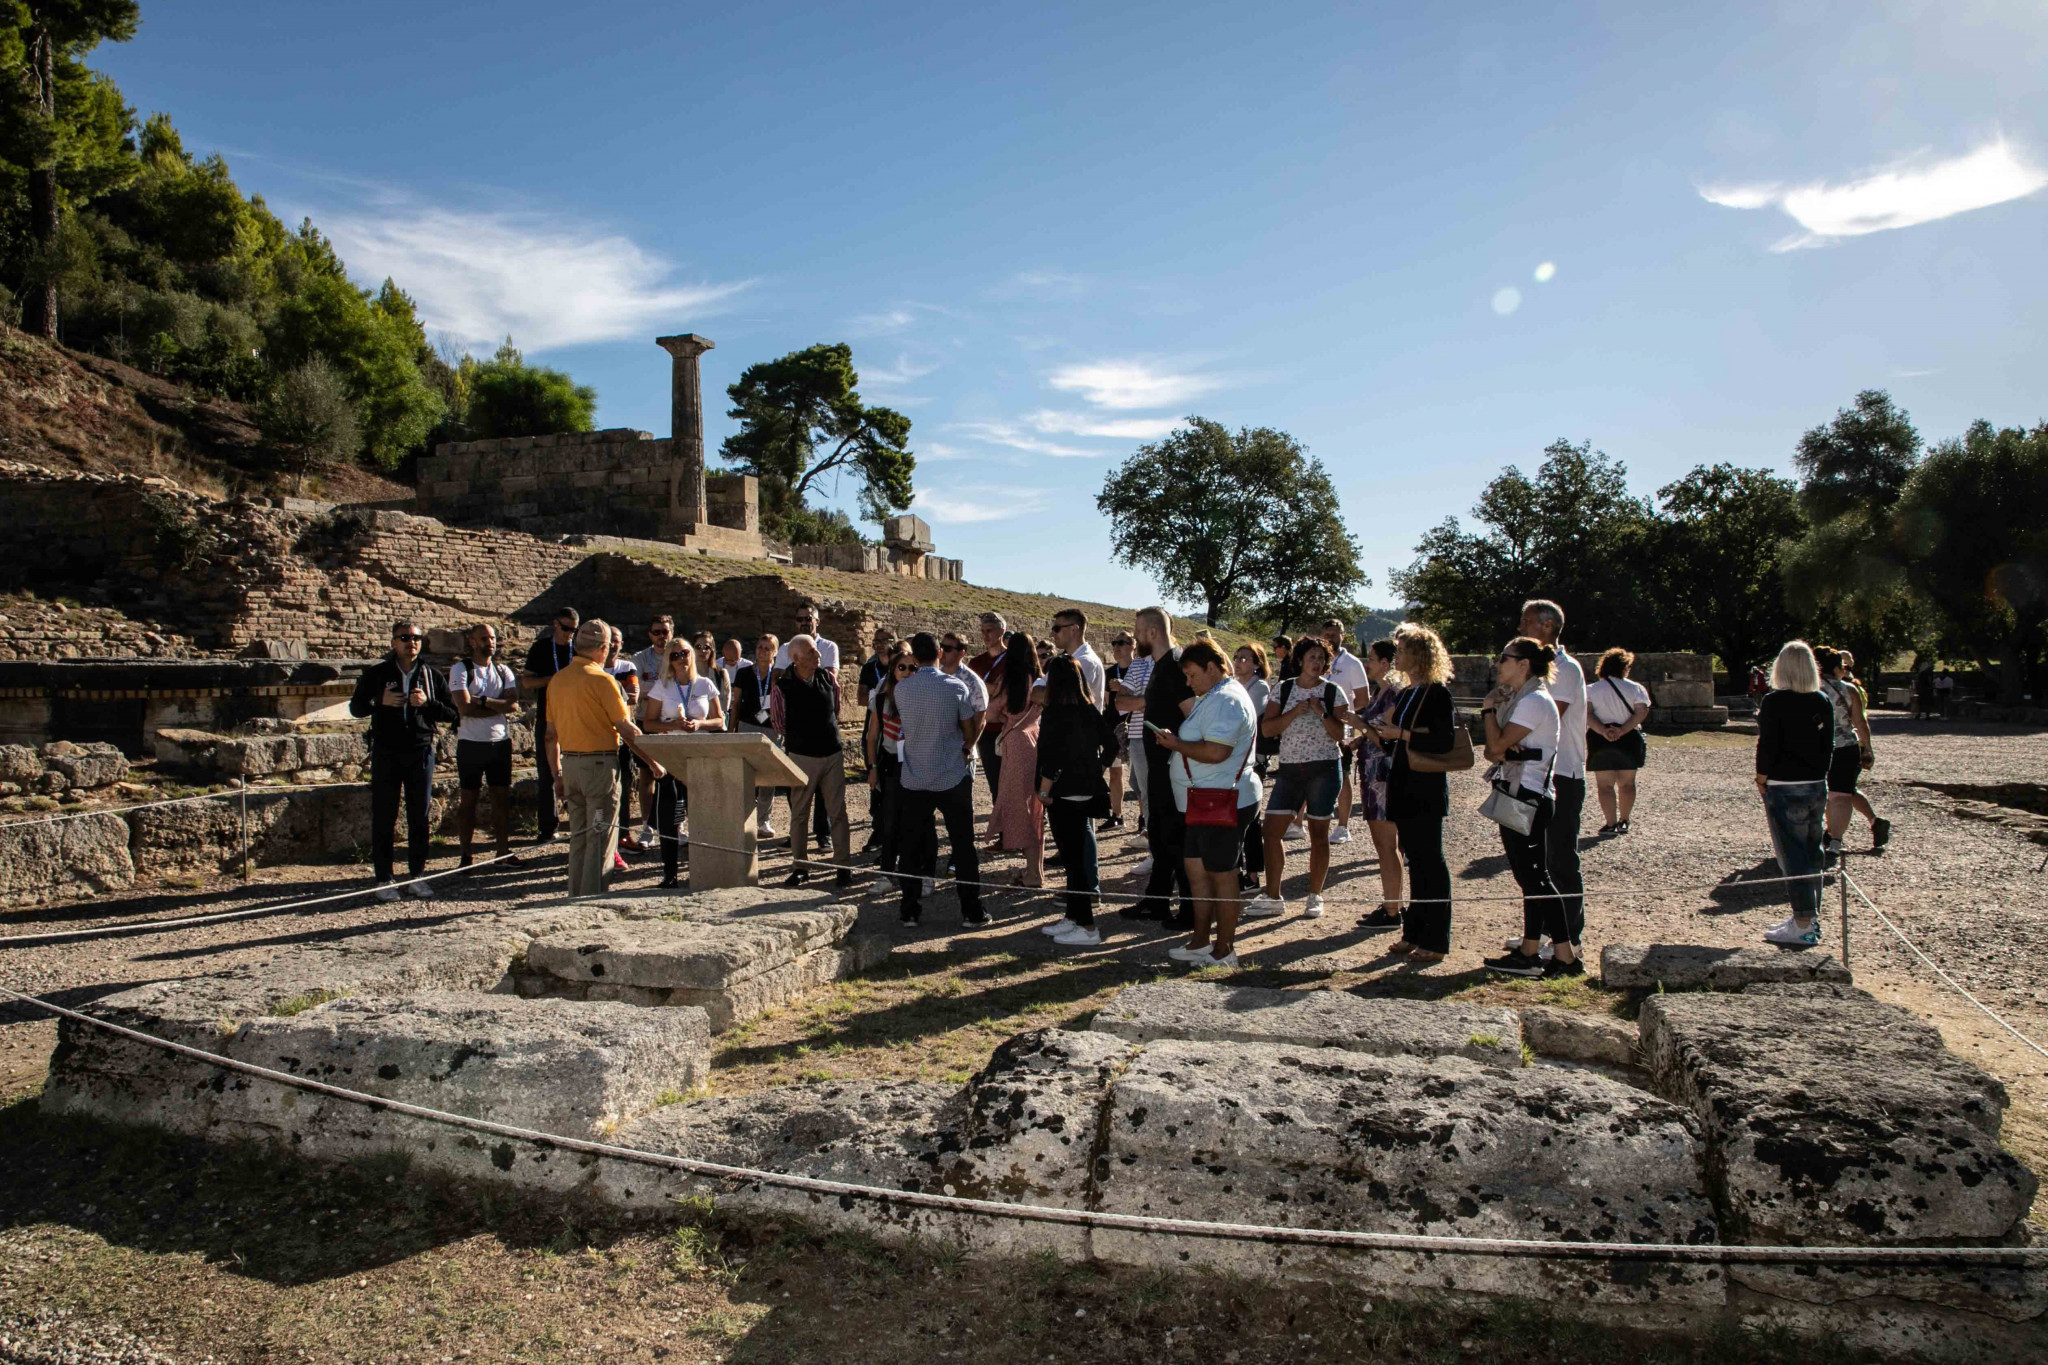 The Olympic Flame is kindled at Ancient Olympia to mark the start of the Torch Relay ©EOC